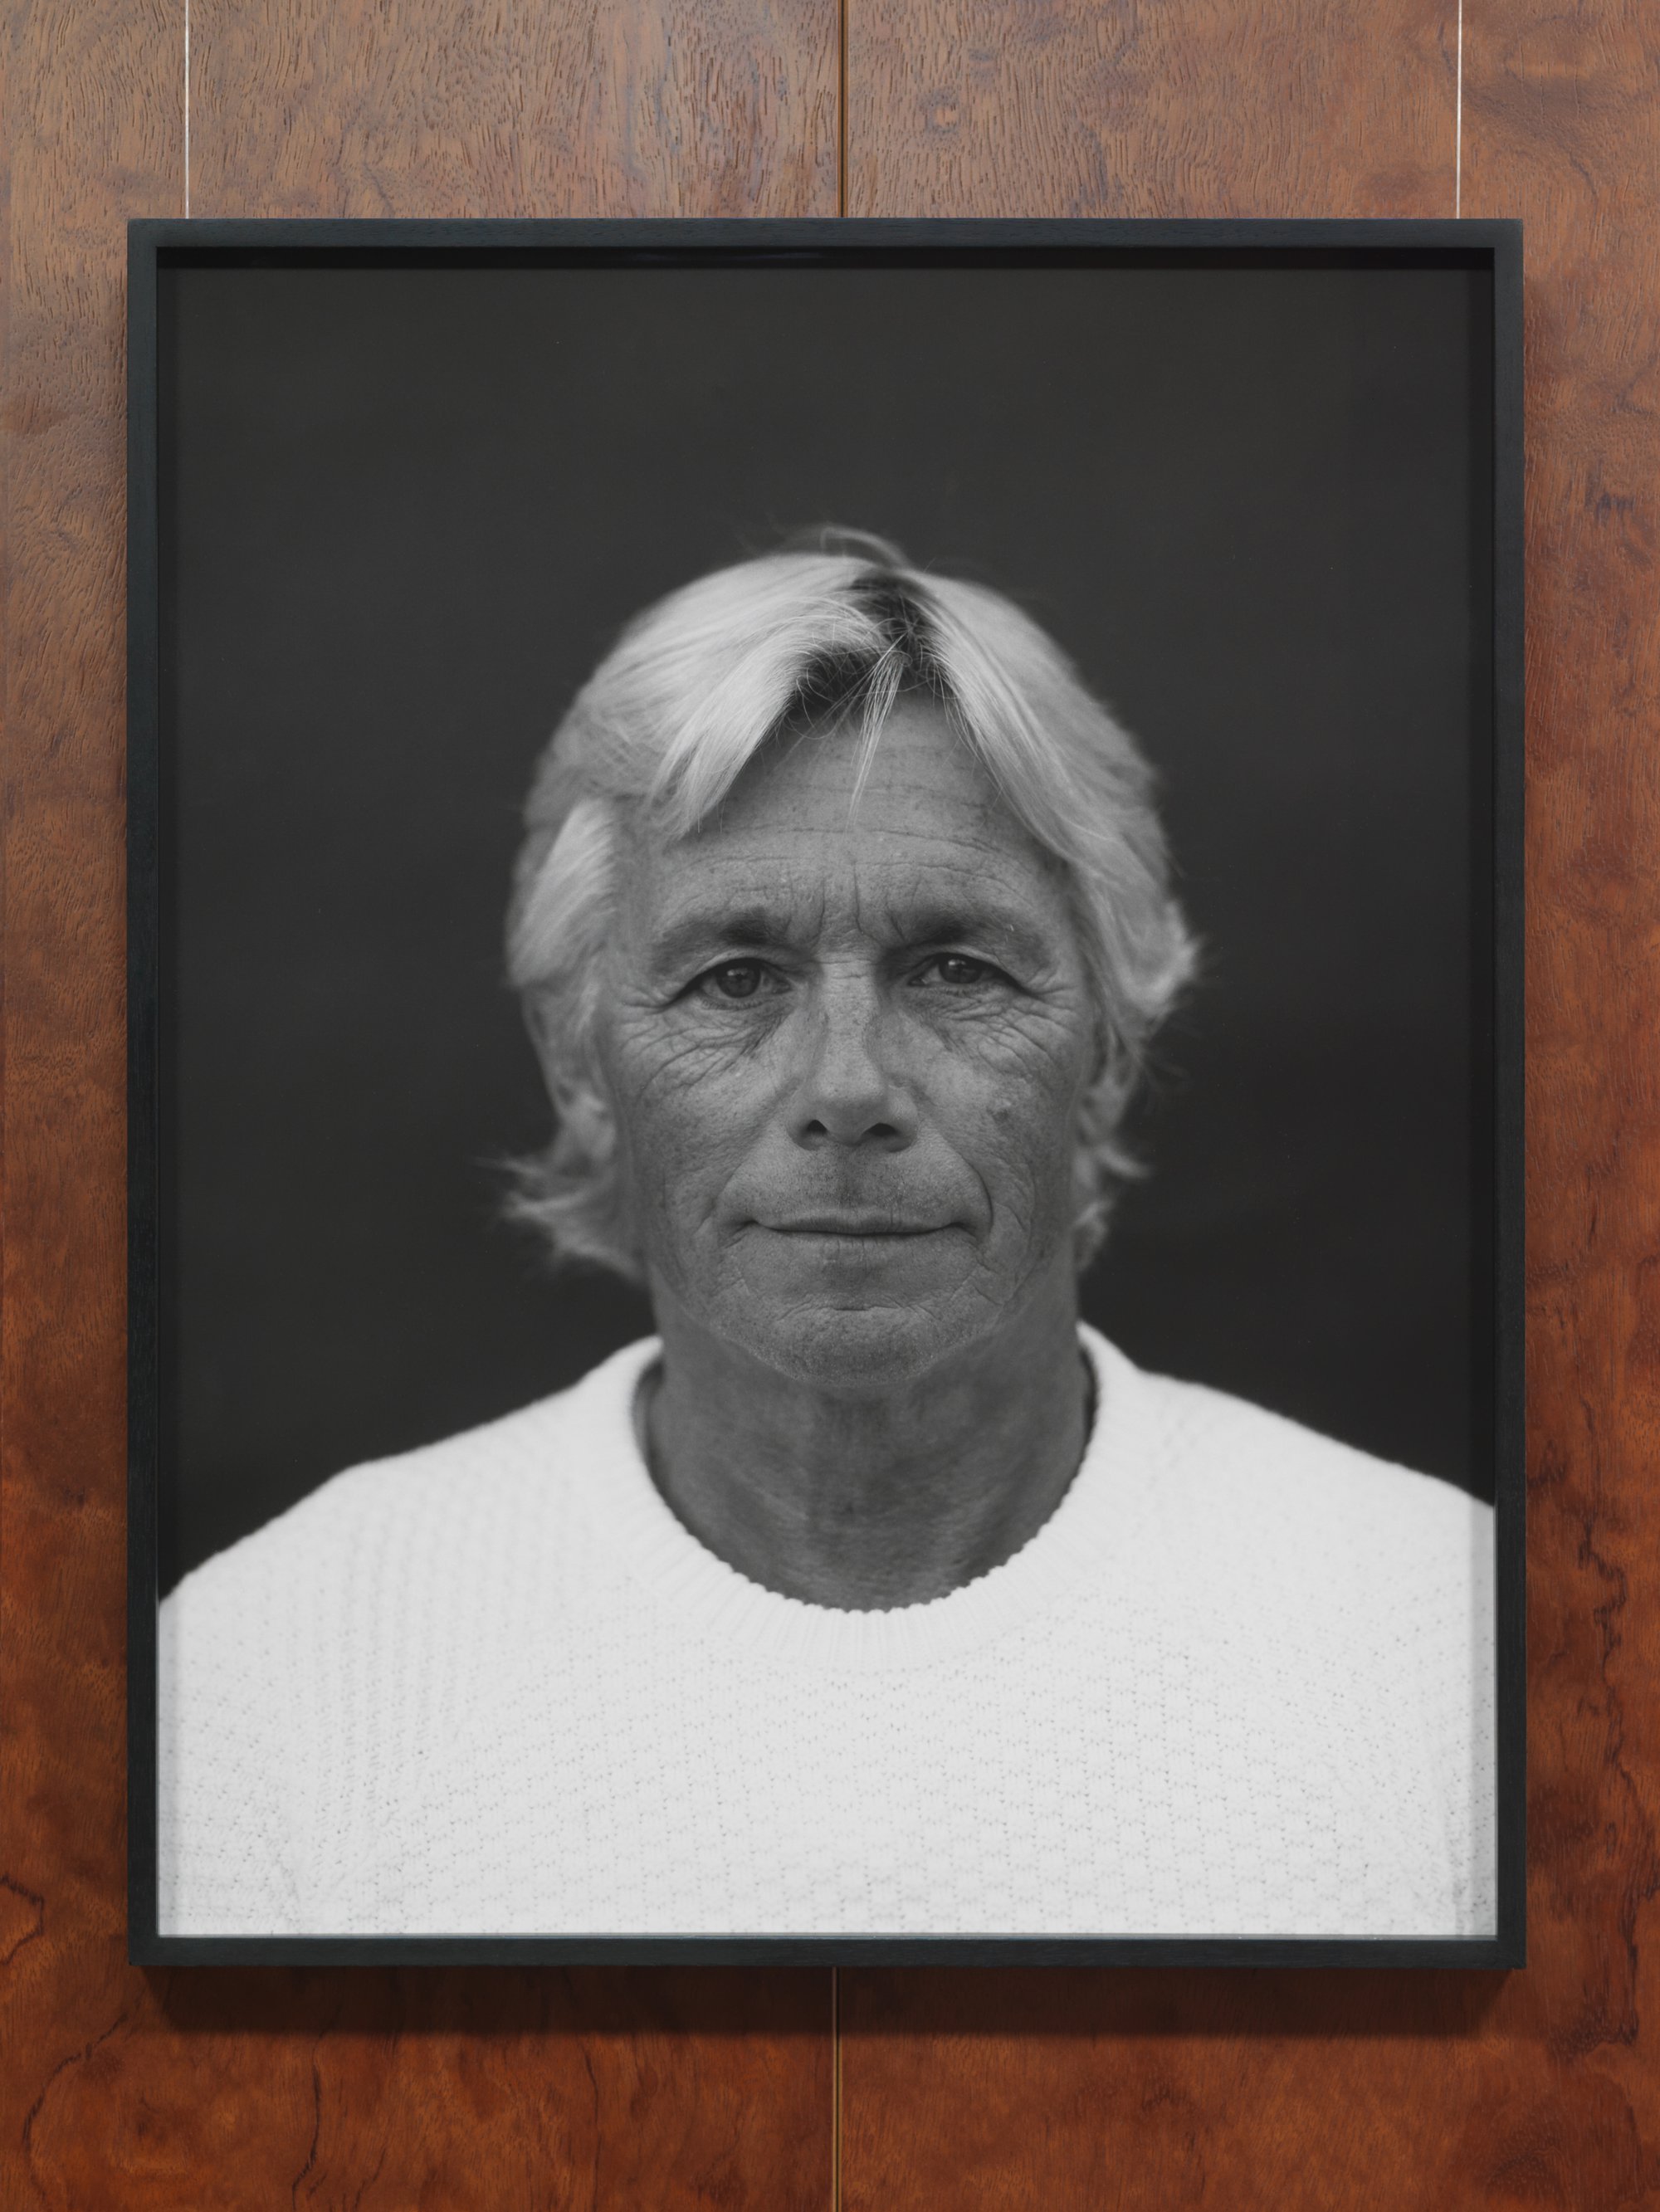 Christodoulos Panayiotou, The Portrait of Christopher Atkins, inkjet print on 300 gsm Pura Smooth, wooden frame, UV glass, 47.5 x 59.5 cm, 2021